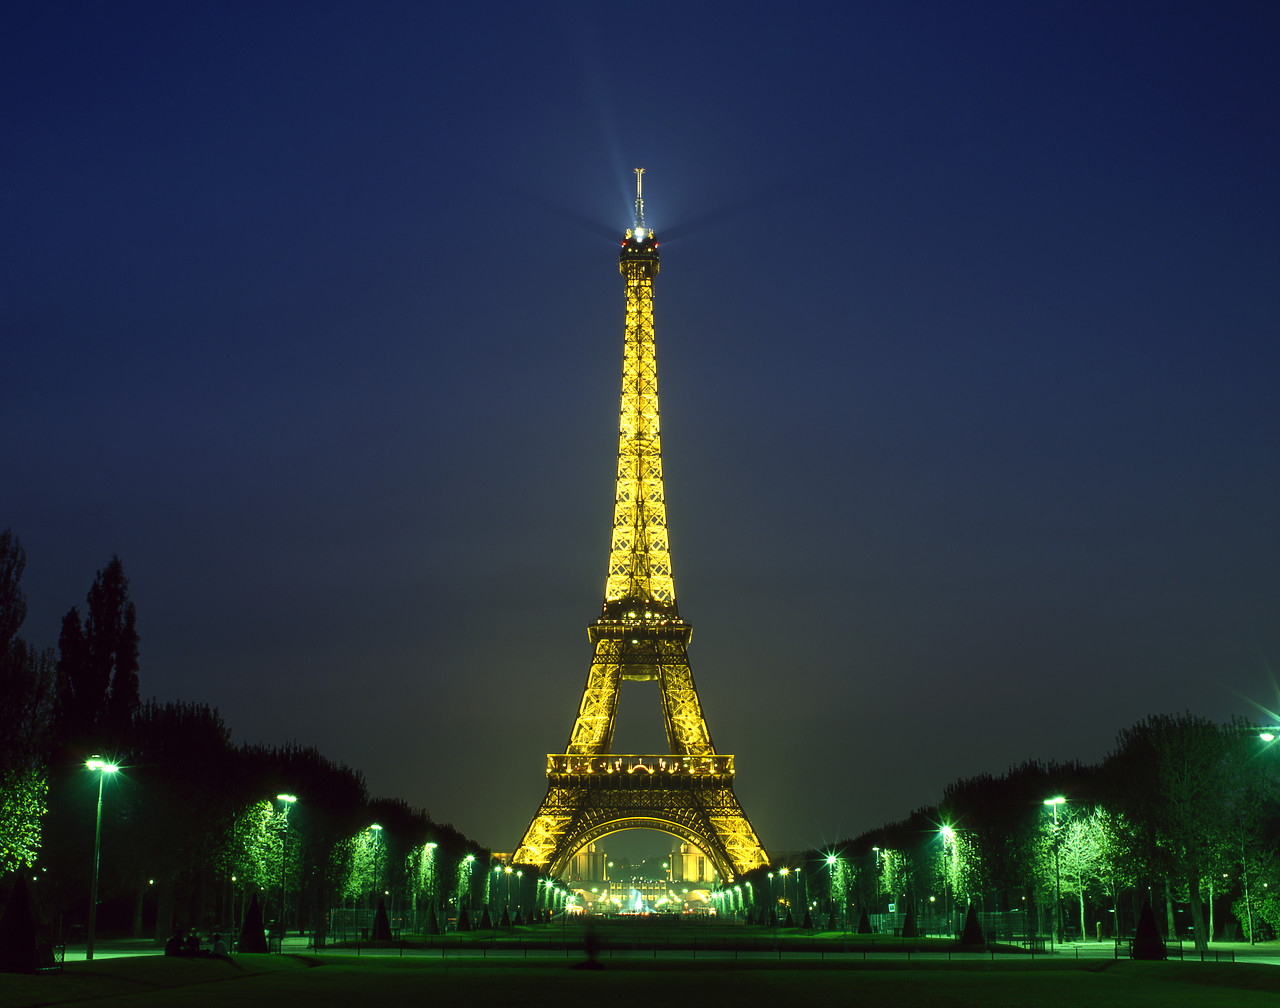 #010168-1 - The Eiffel Tower at Night, Paris, France